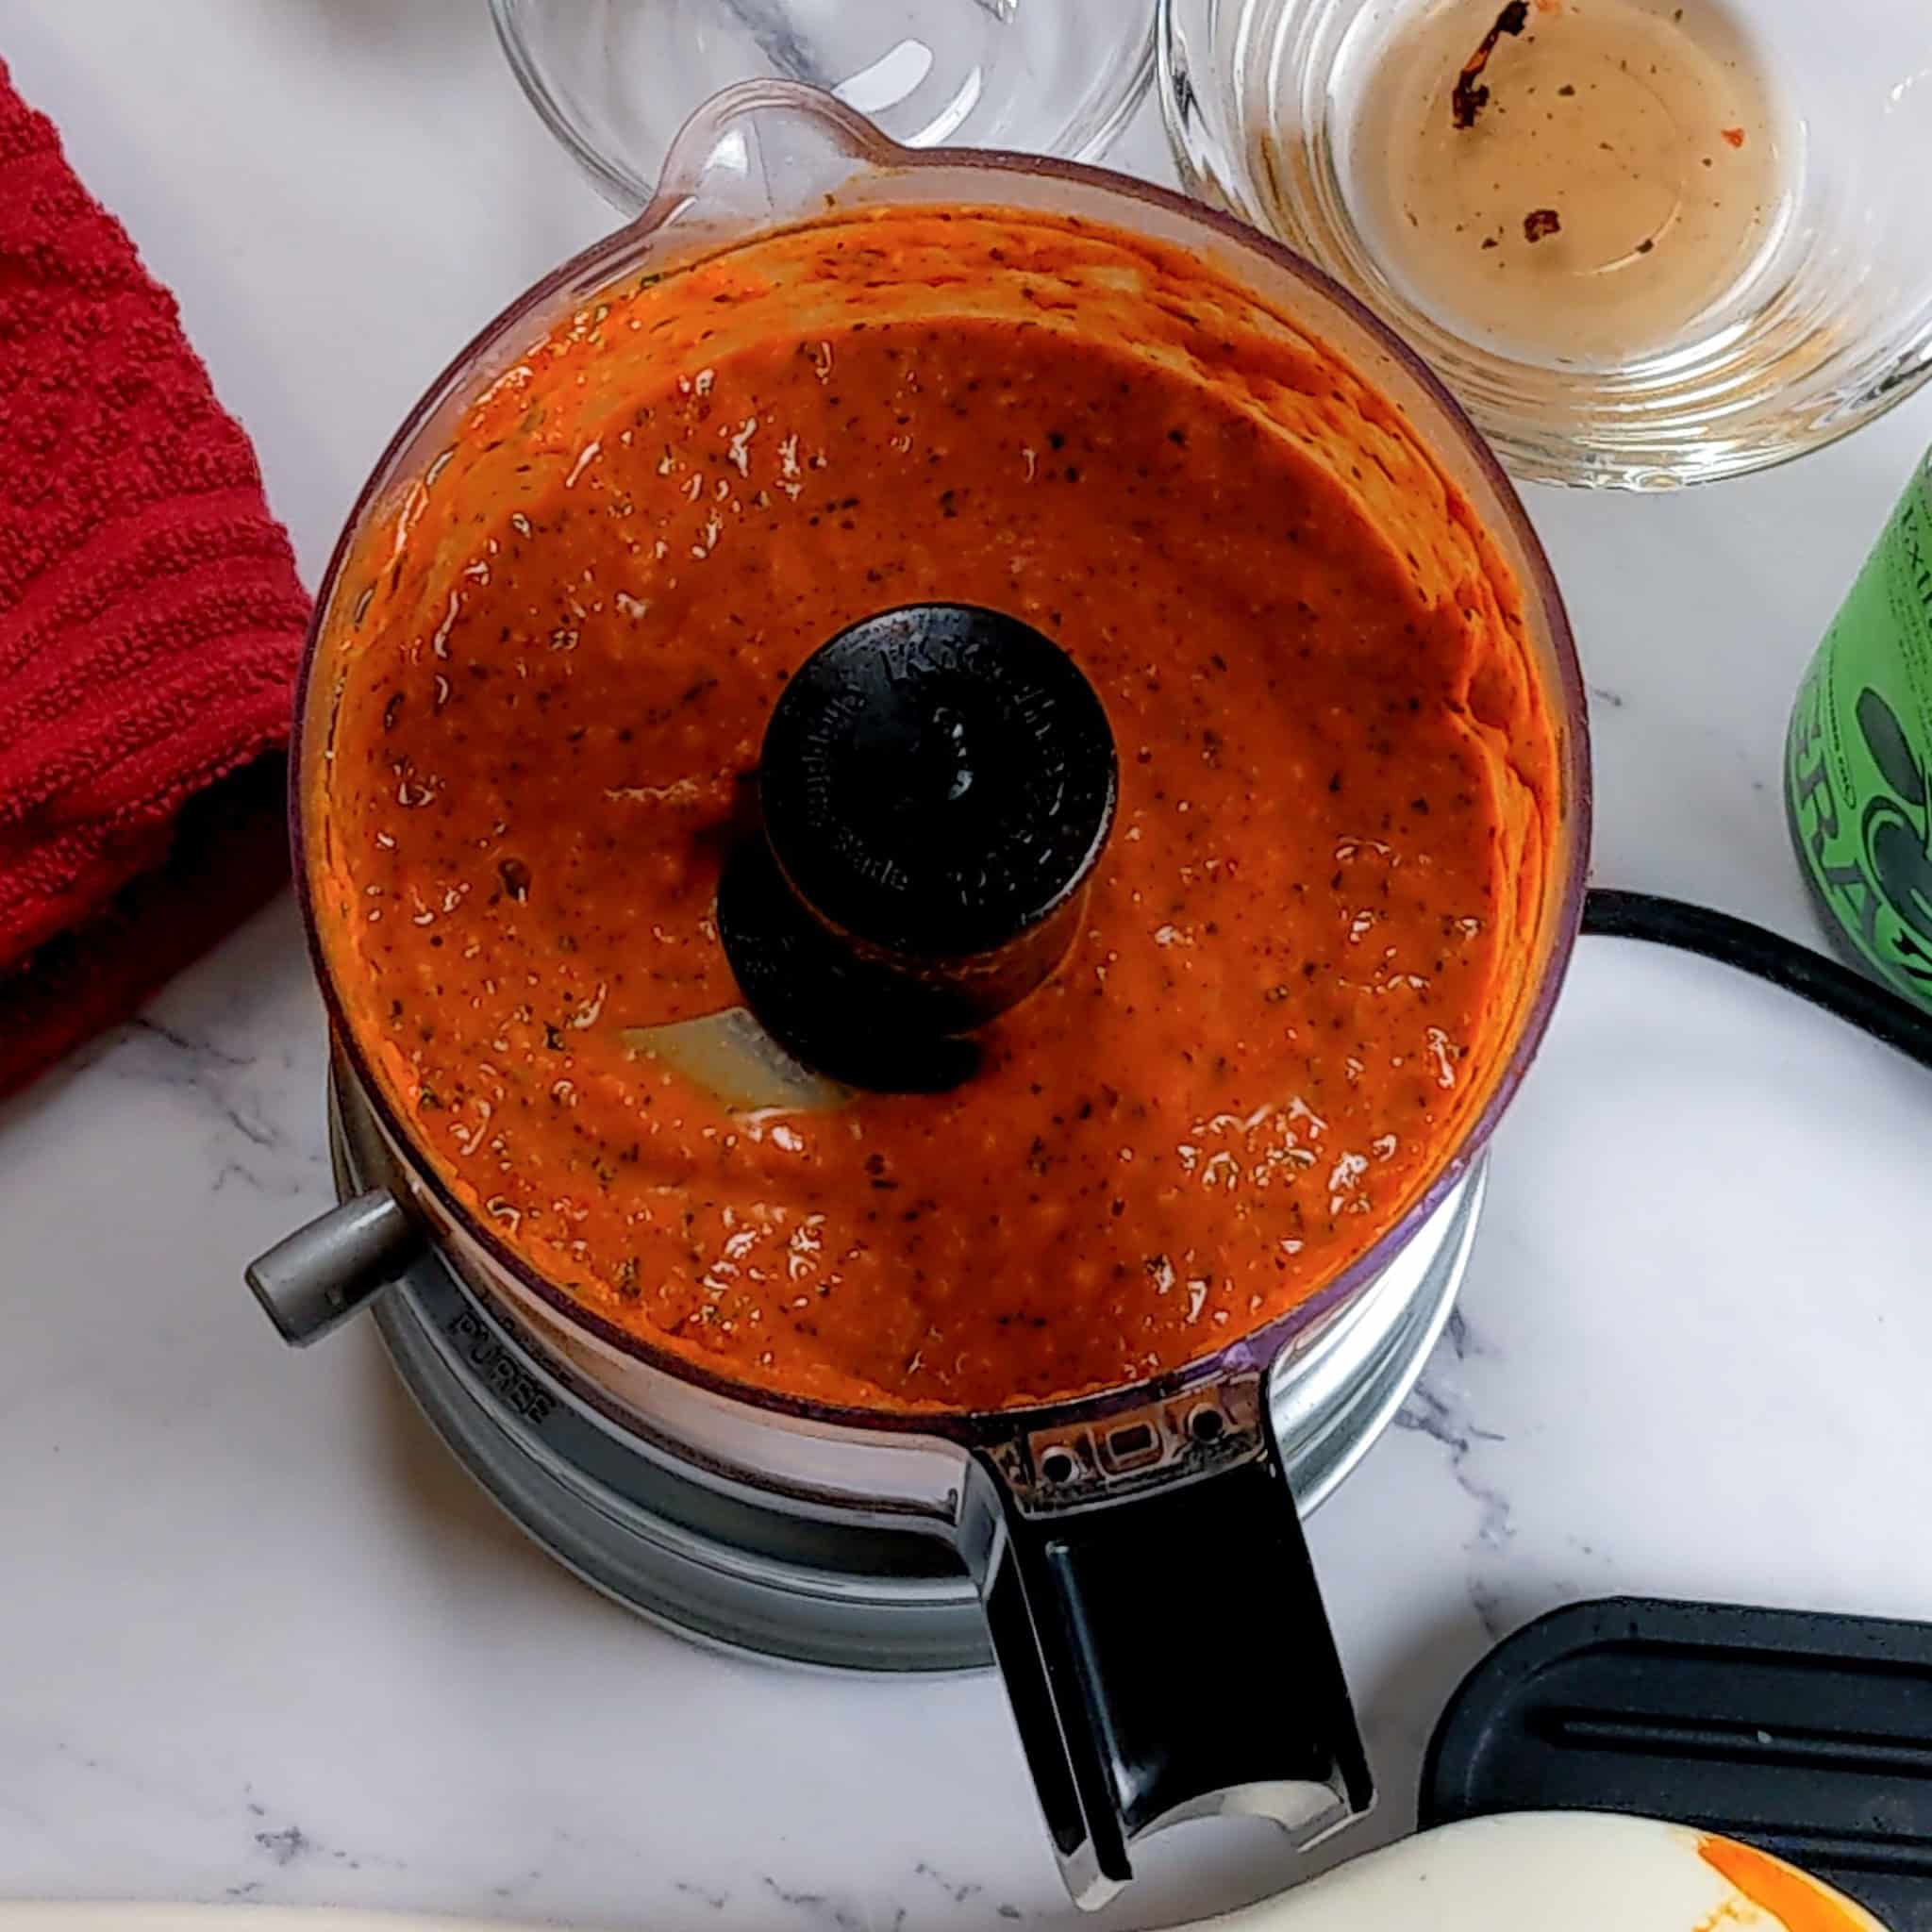 the finished spicy basil romesco sauce in the kitchenaid chopper.